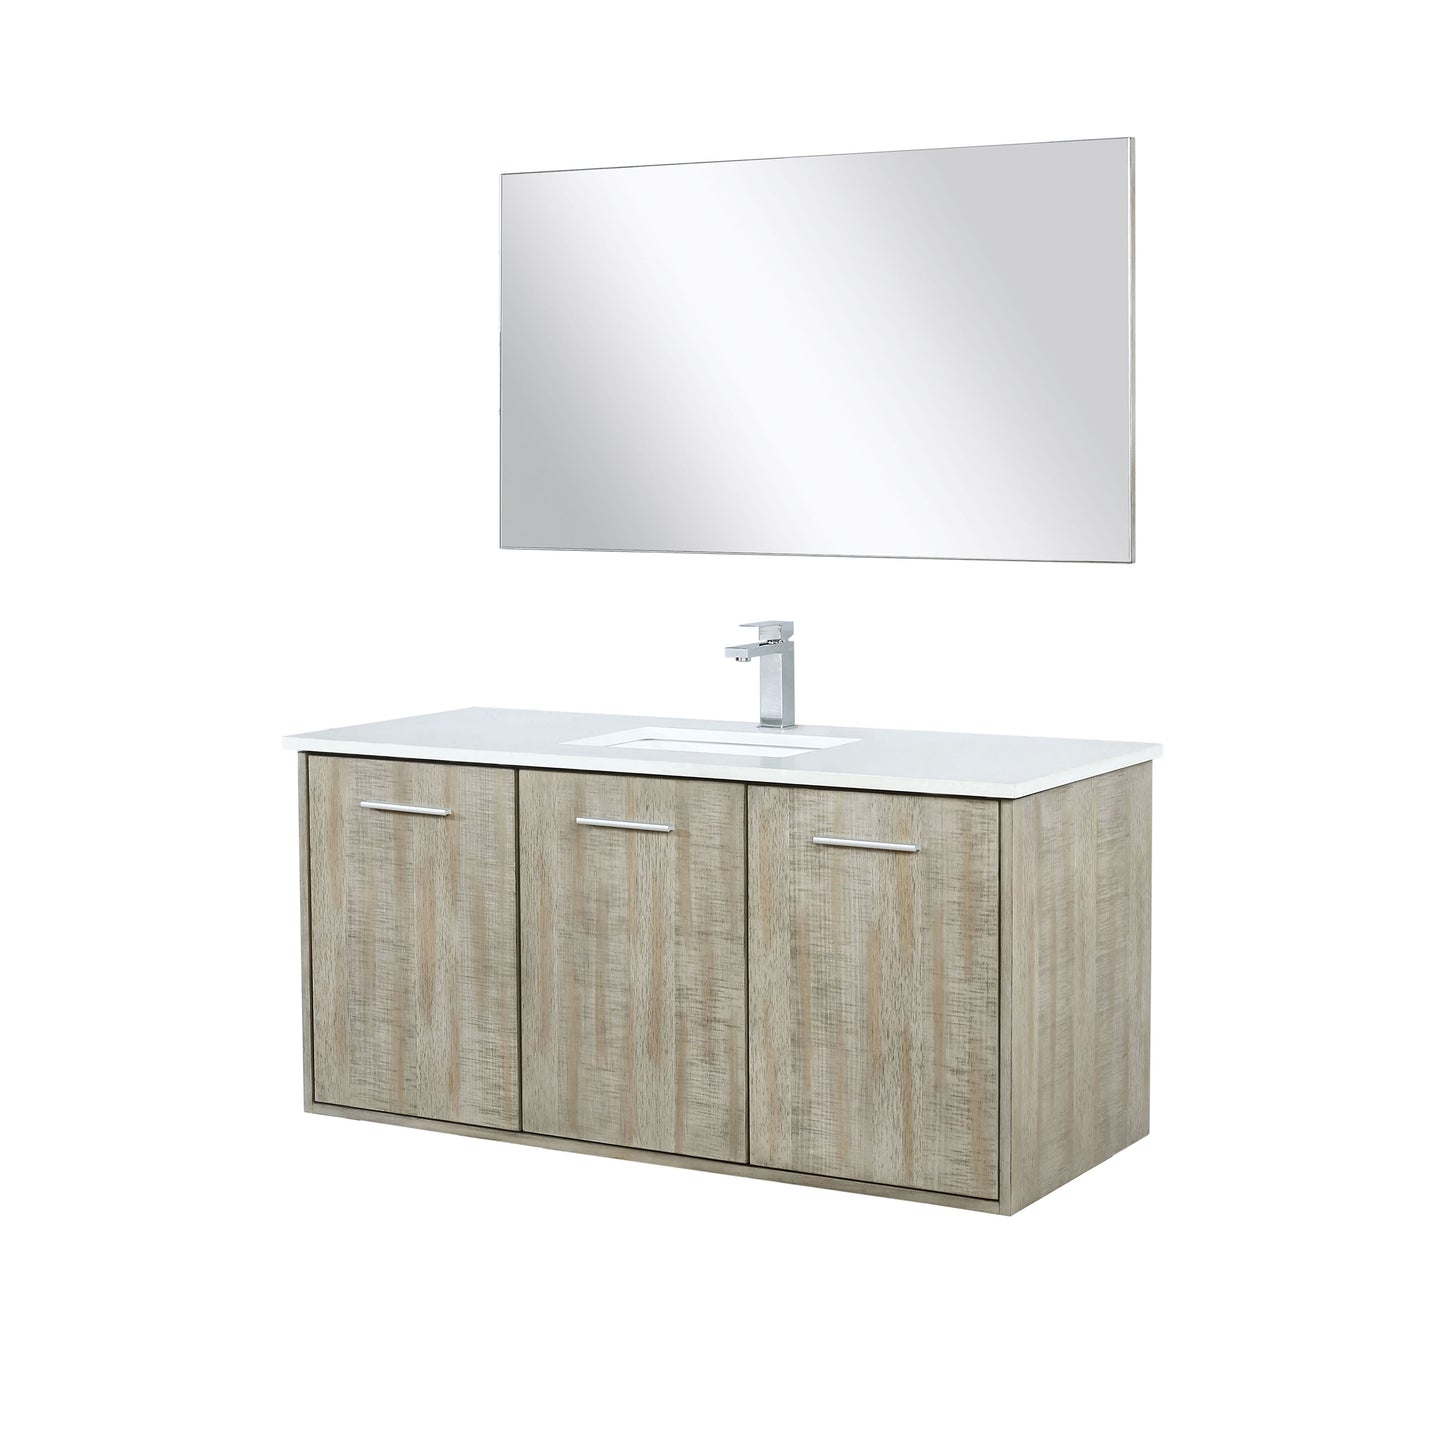 Lexora Collection Fairbanks 48 inch Rustic Acacia Bath Vanity, Cultured Marble Top, Faucet Set and 43 inch Mirror - Luxe Bathroom Vanities